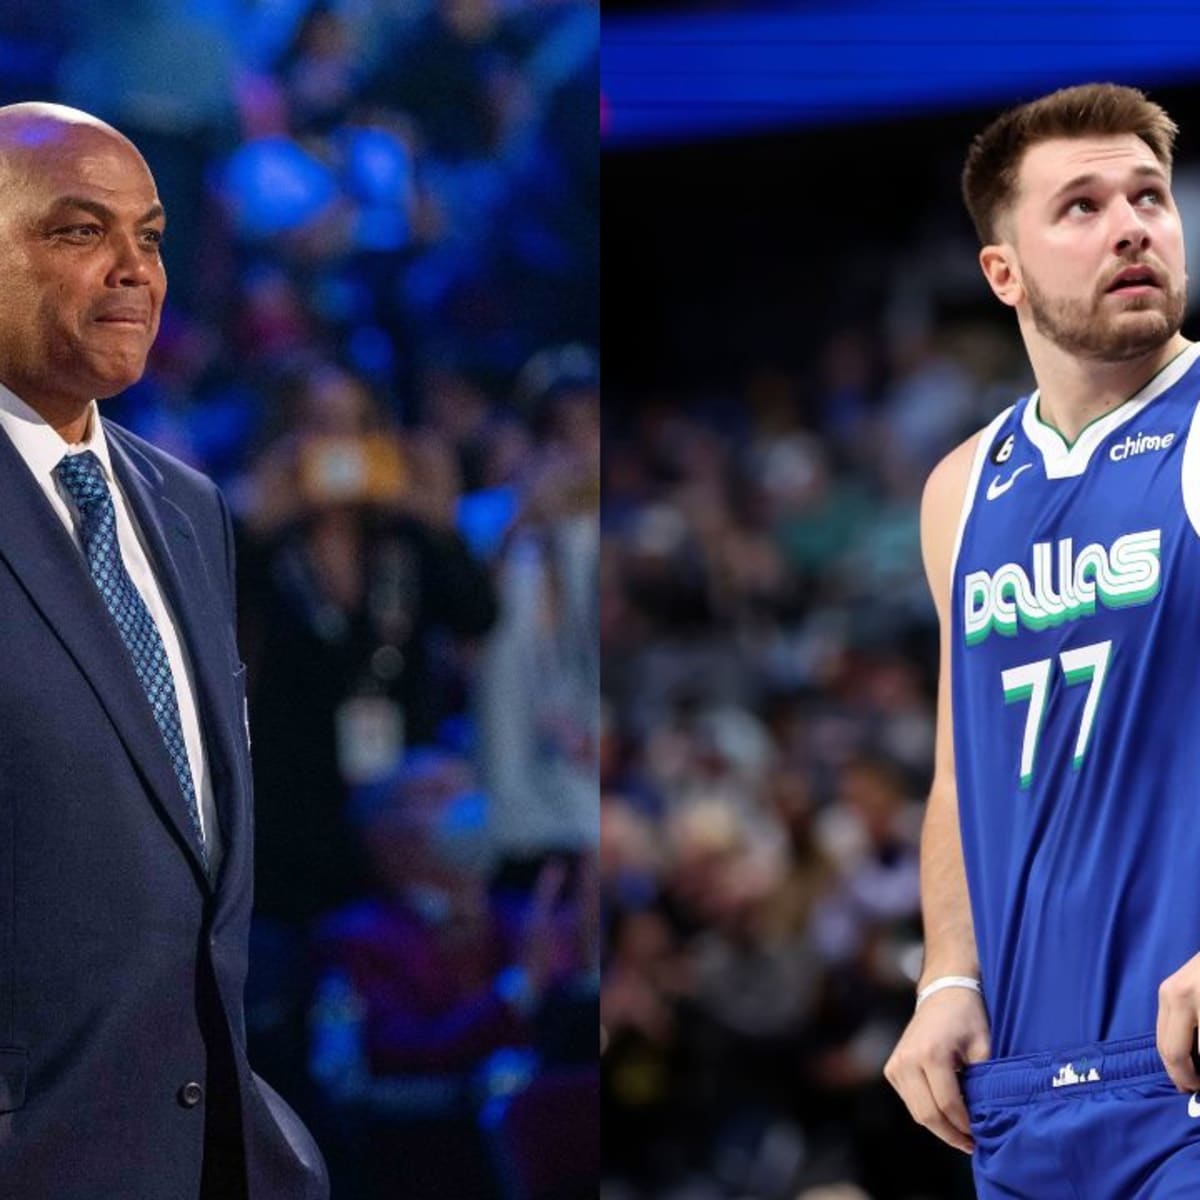 Charles Barkley thinks the Mavericks are too Doncic-centric to win